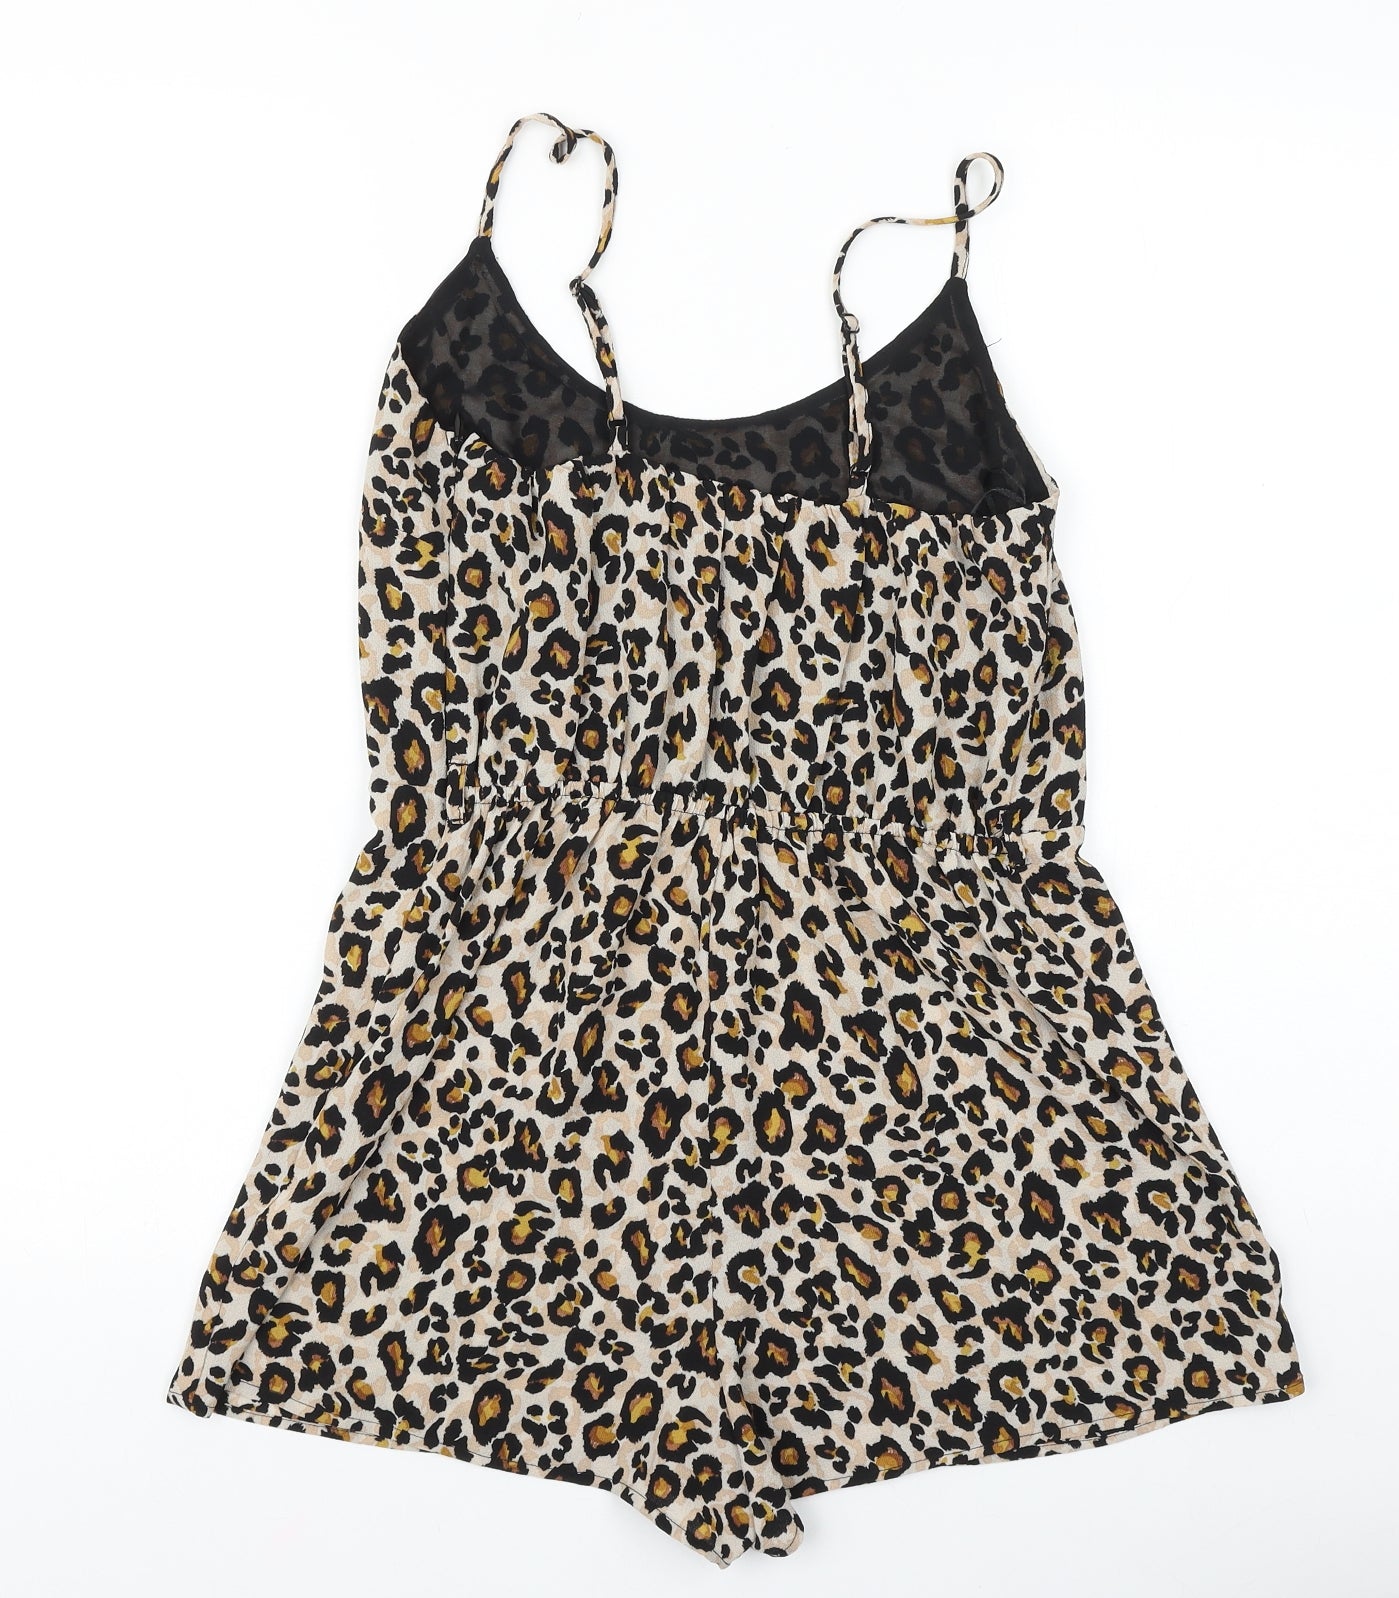 New Look Womens Brown Animal Print Polyester Playsuit One-Piece Size 10 Pullover - Leopard print